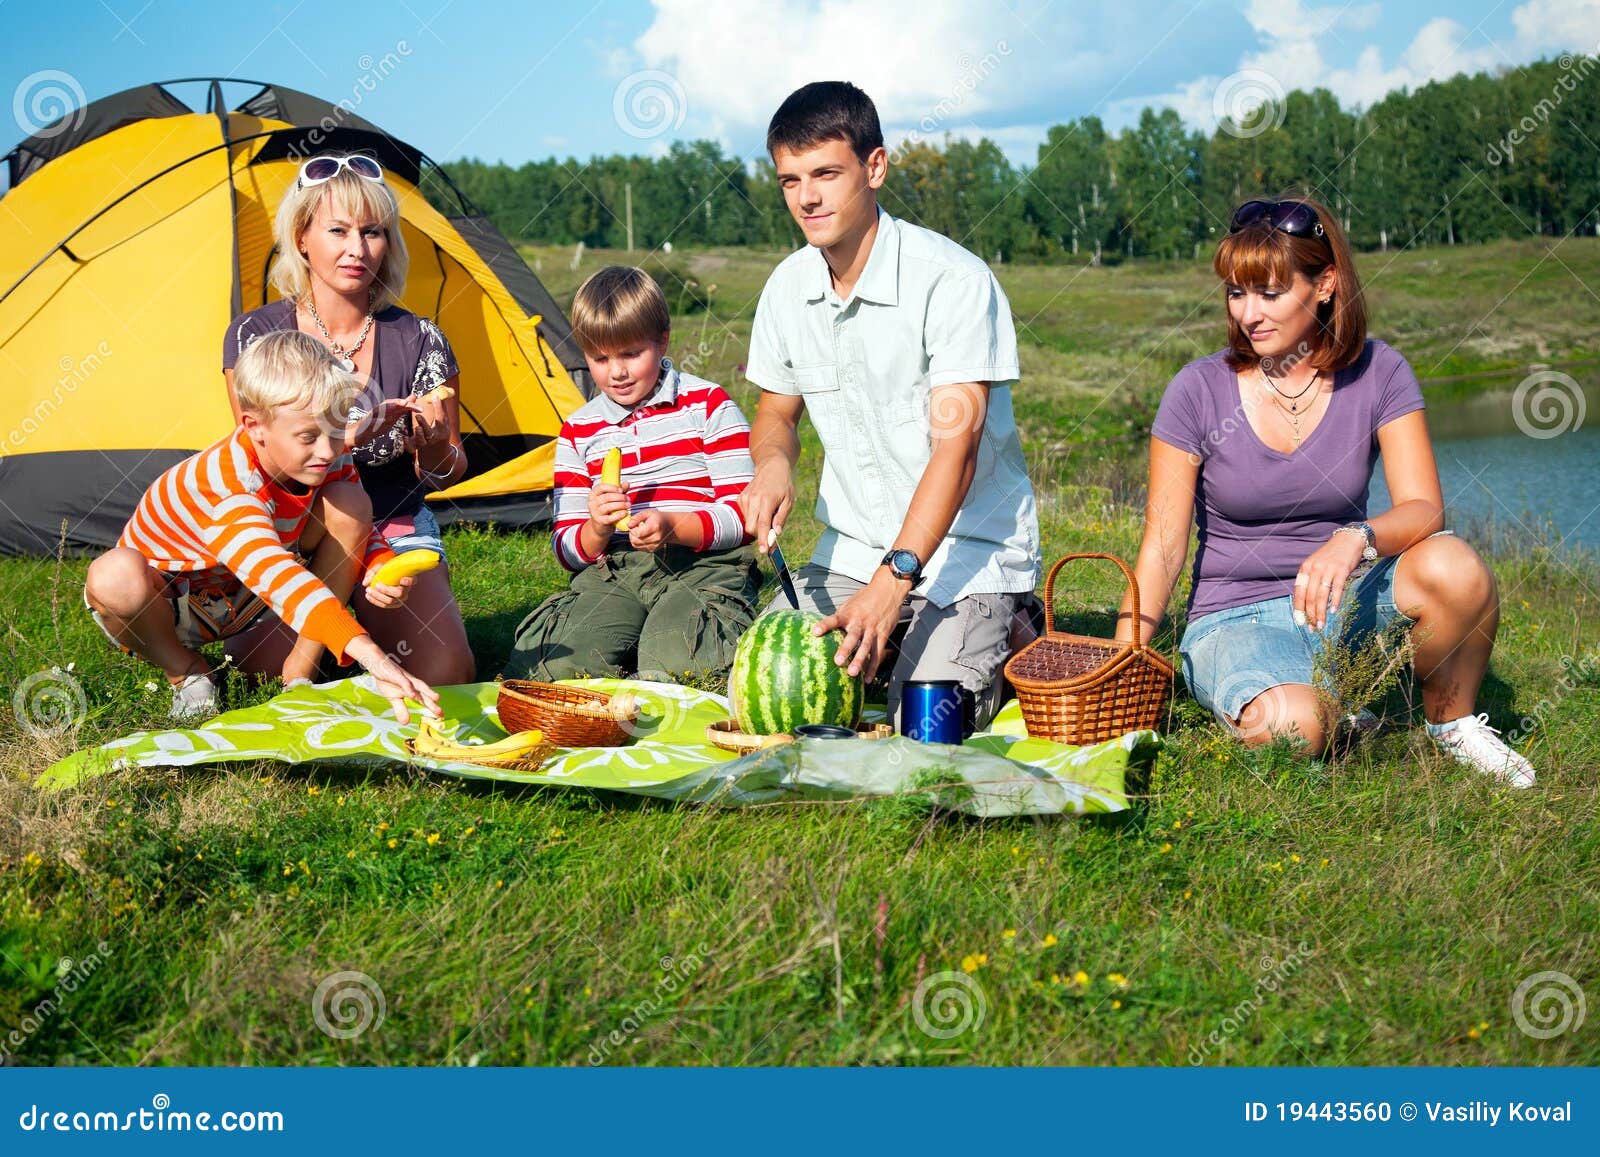 Family picnic stock photo. Image of meat, park, countryside - 19443560